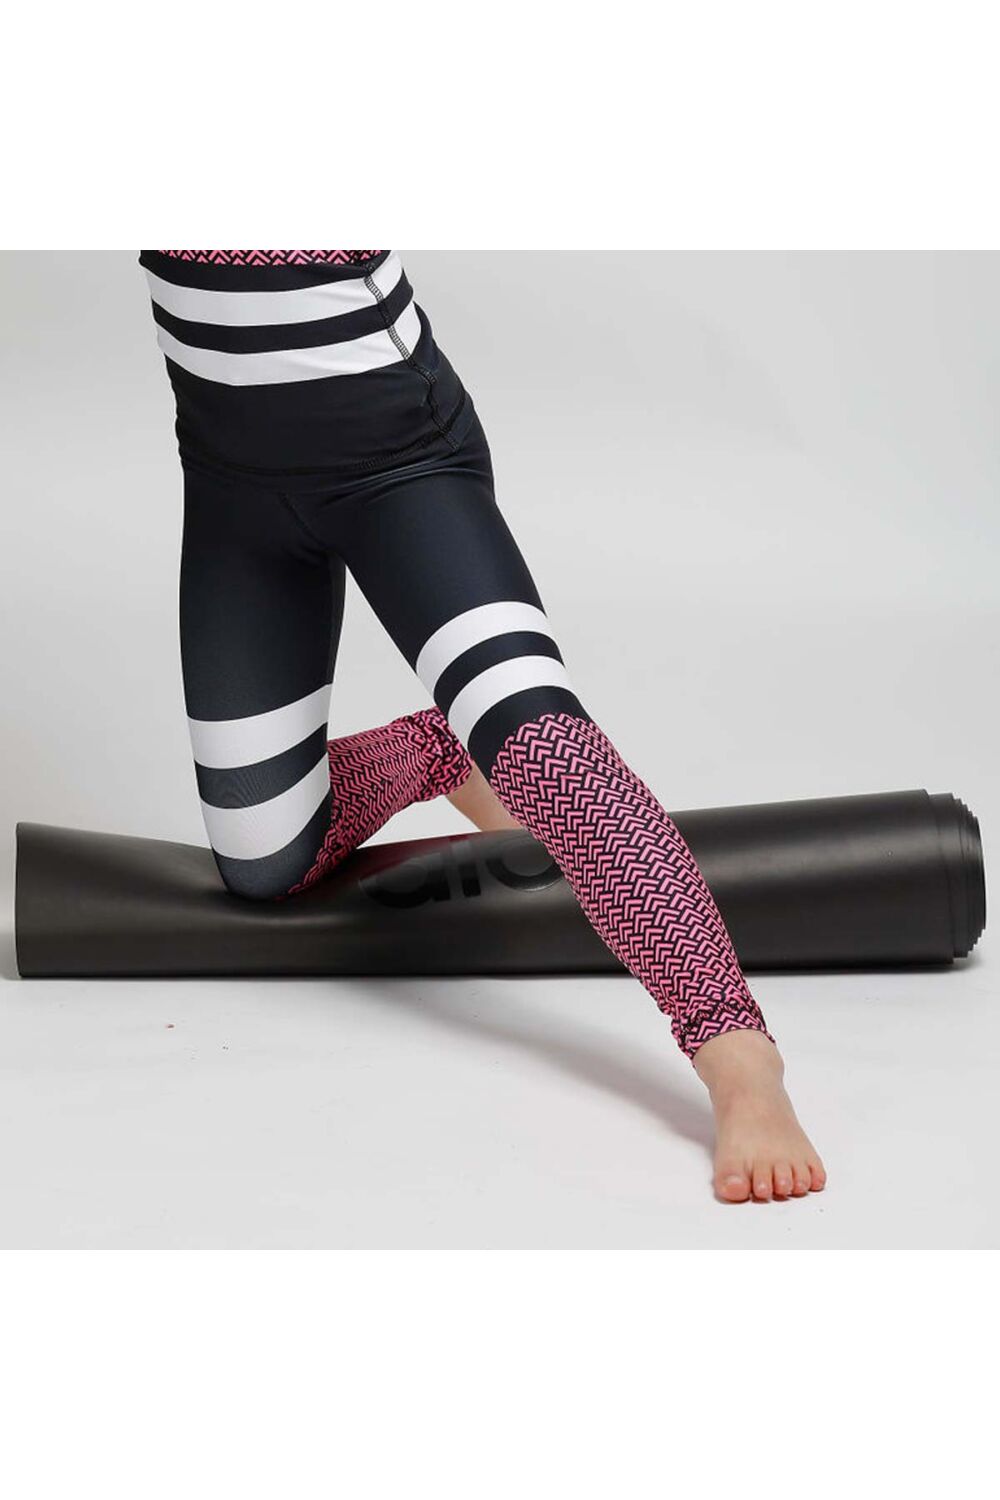 Kids Scaly pink fitness leggings